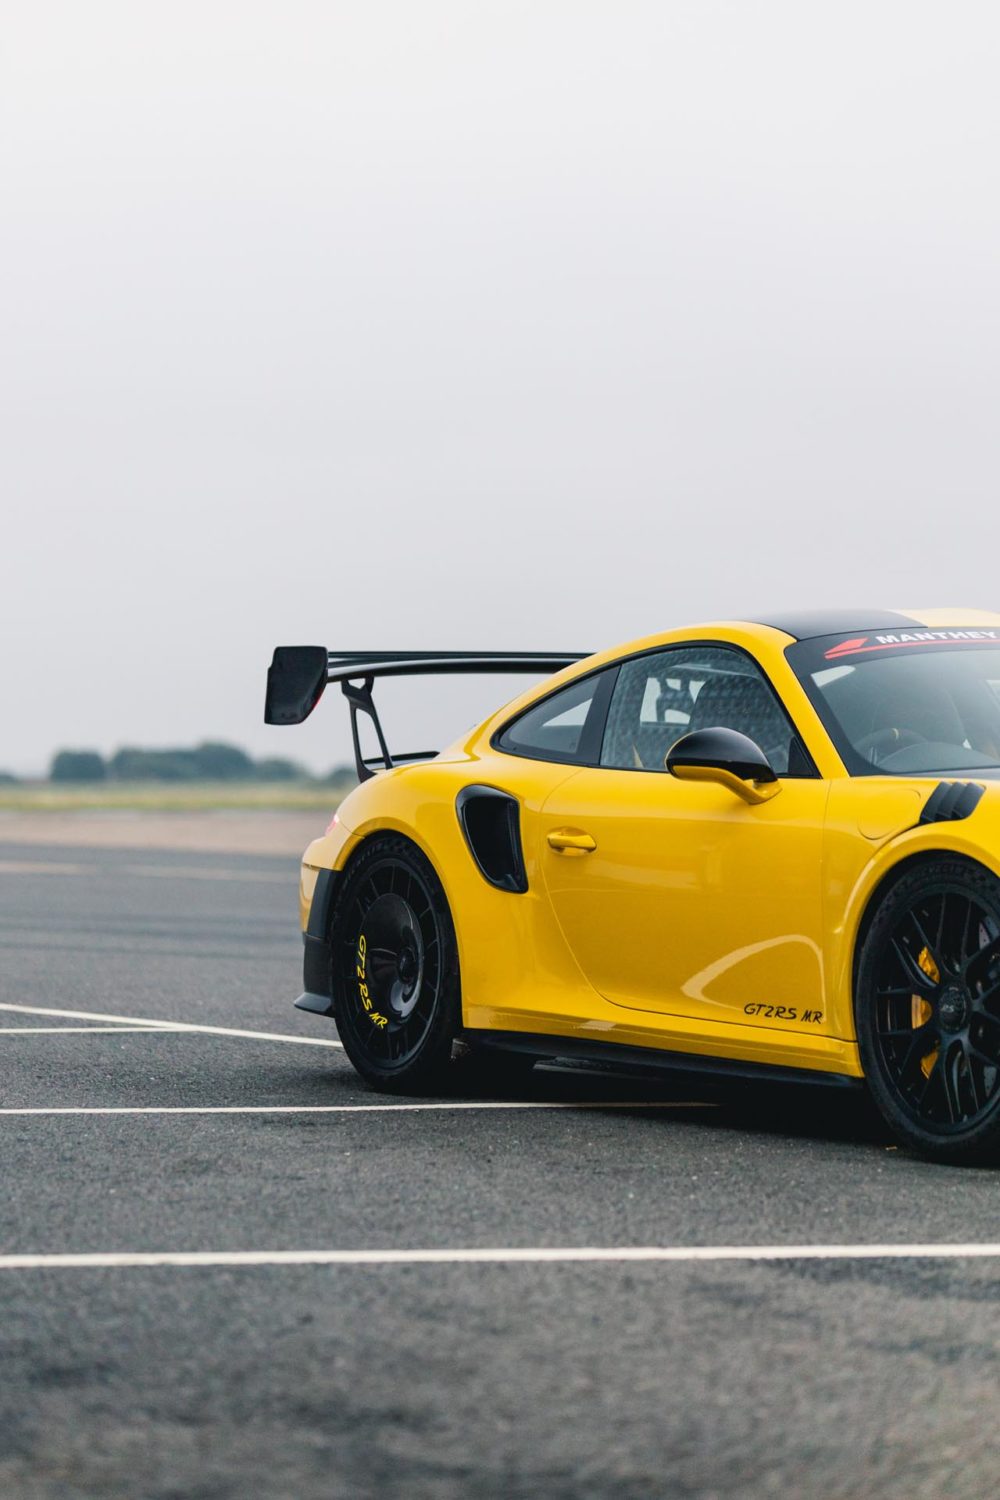 991 gt2rs mr